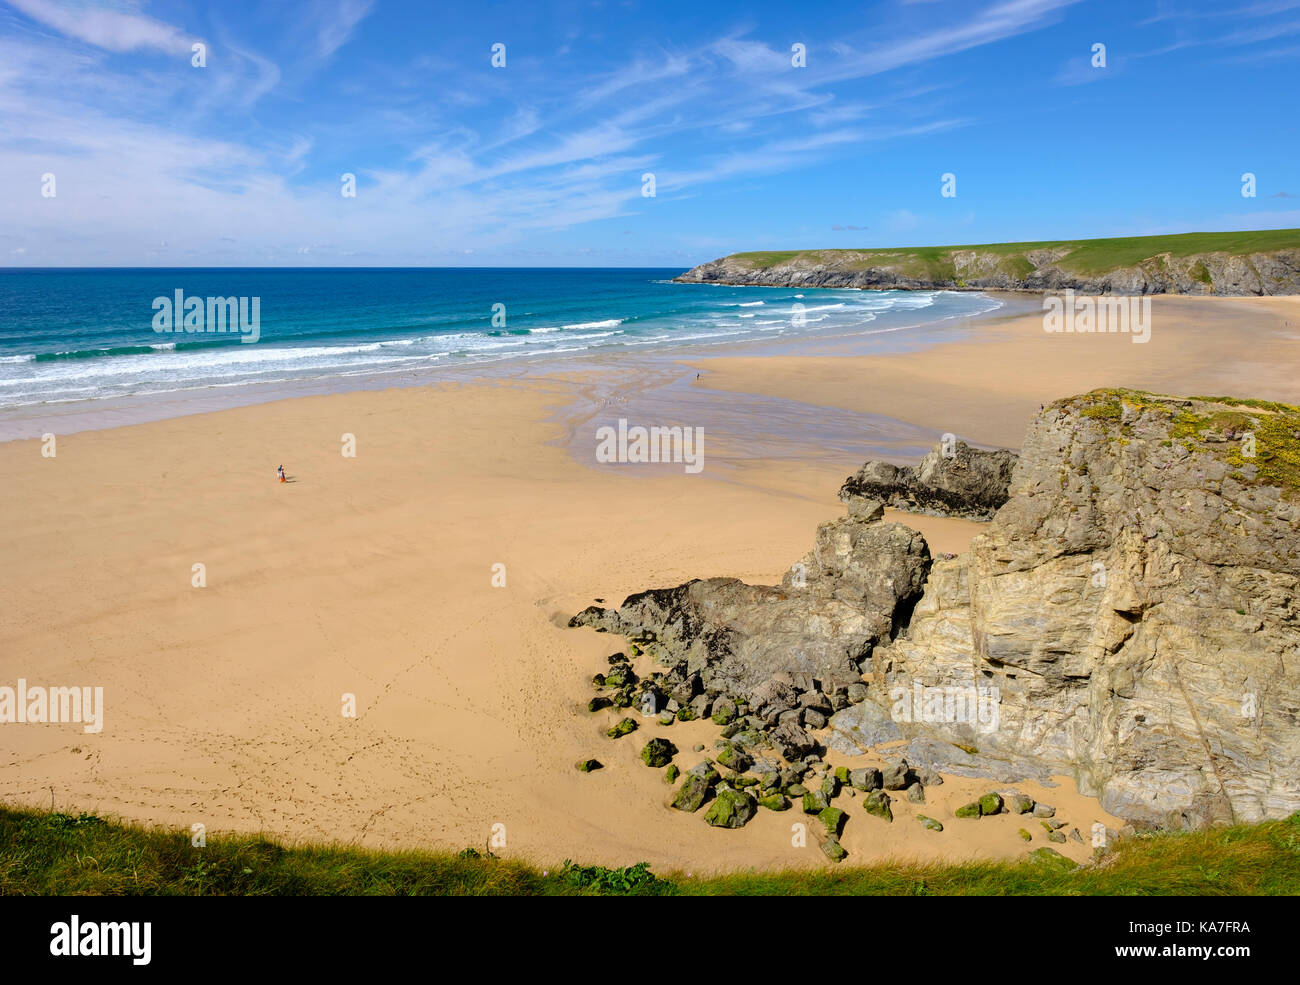 Plage, baie de holywell holywell, près de Newquay, Cornwall, Angleterre, Grande-Bretagne Banque D'Images